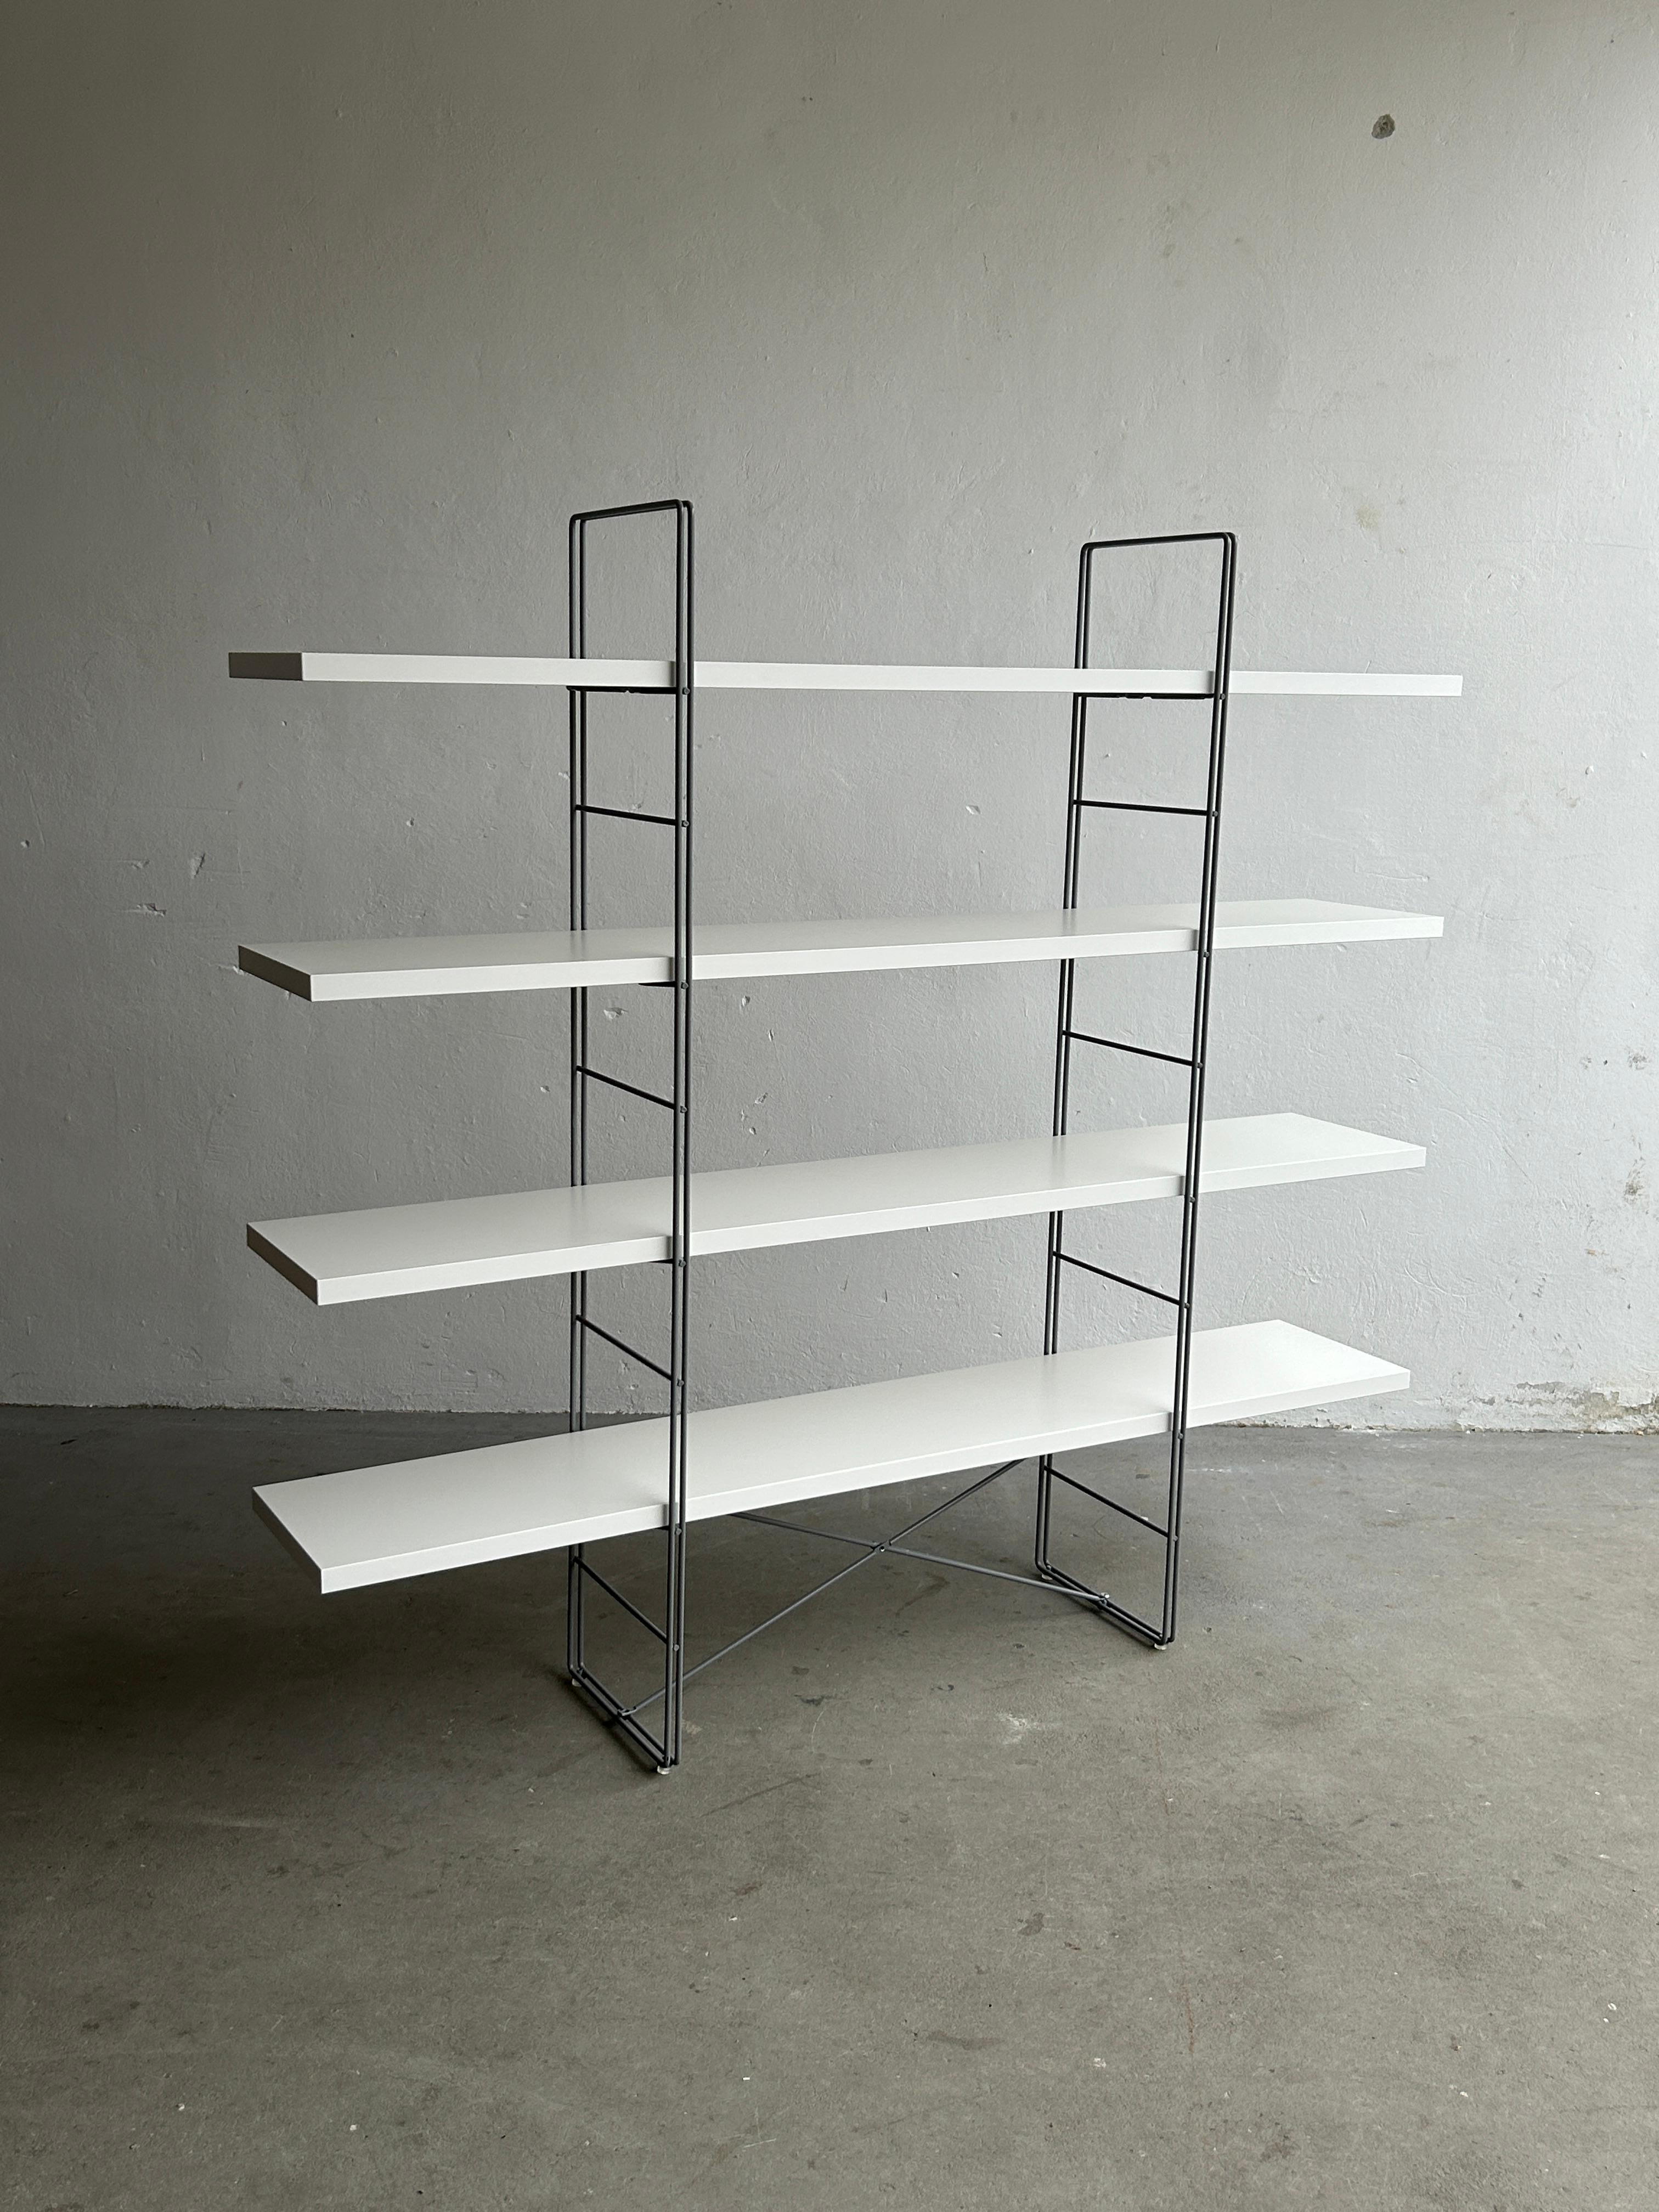 The famous Ikea shelf designed by Niels Gammelgaard in the 1980s, first introduced as the 'Moment' shelf, and later changing its name to 'Enetri' and 'Guide'.

One of the most searched for vintage Ikea designs, this particular piece was produced